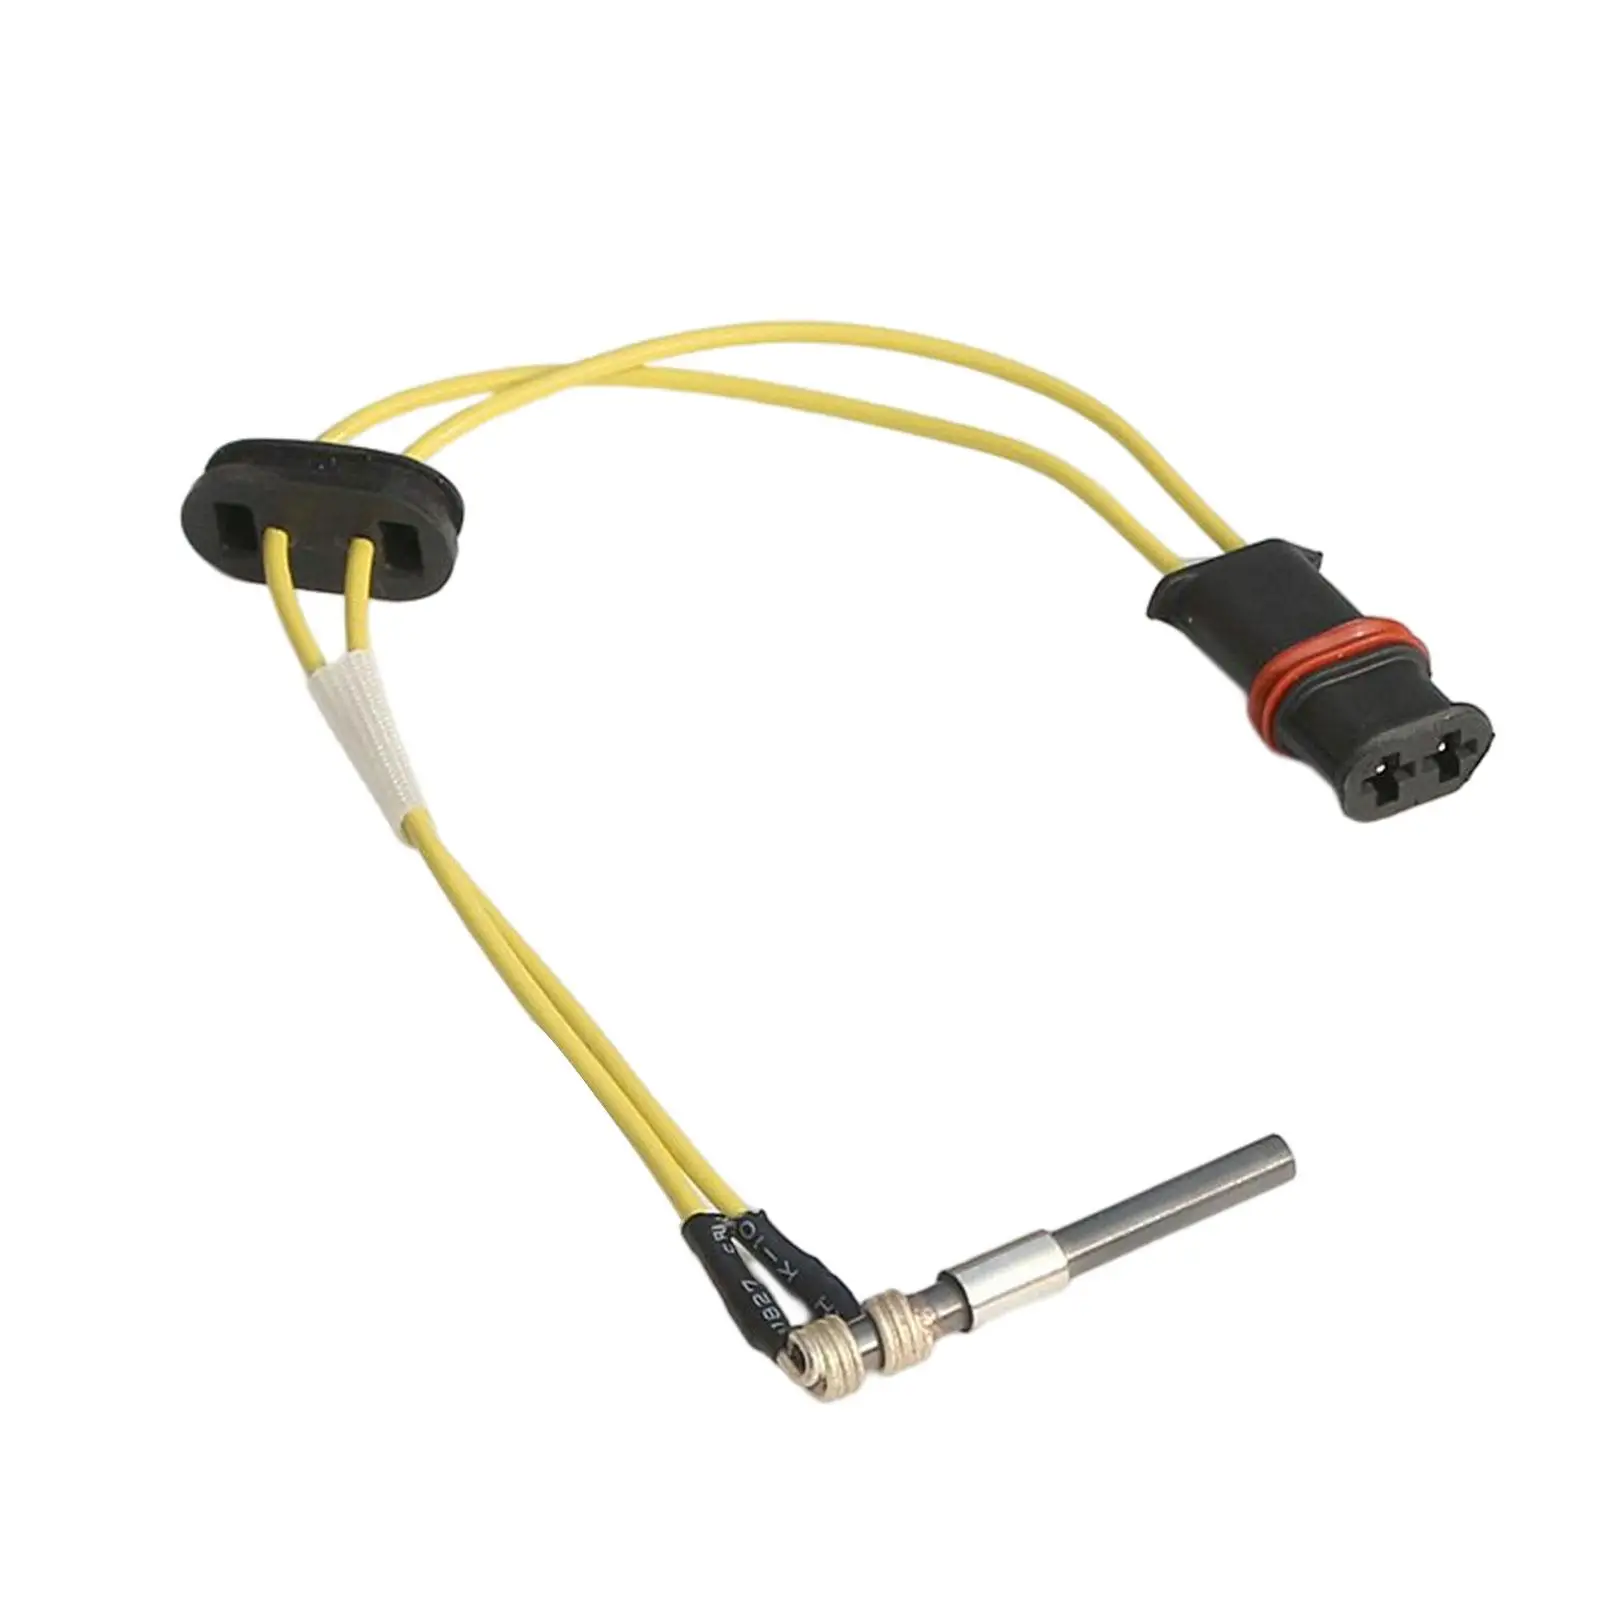 12V Parking Heater Glow Plug Sturdy Preheating Ignition pin Electric Heating Rod for 3500 5000 Accessories Modification